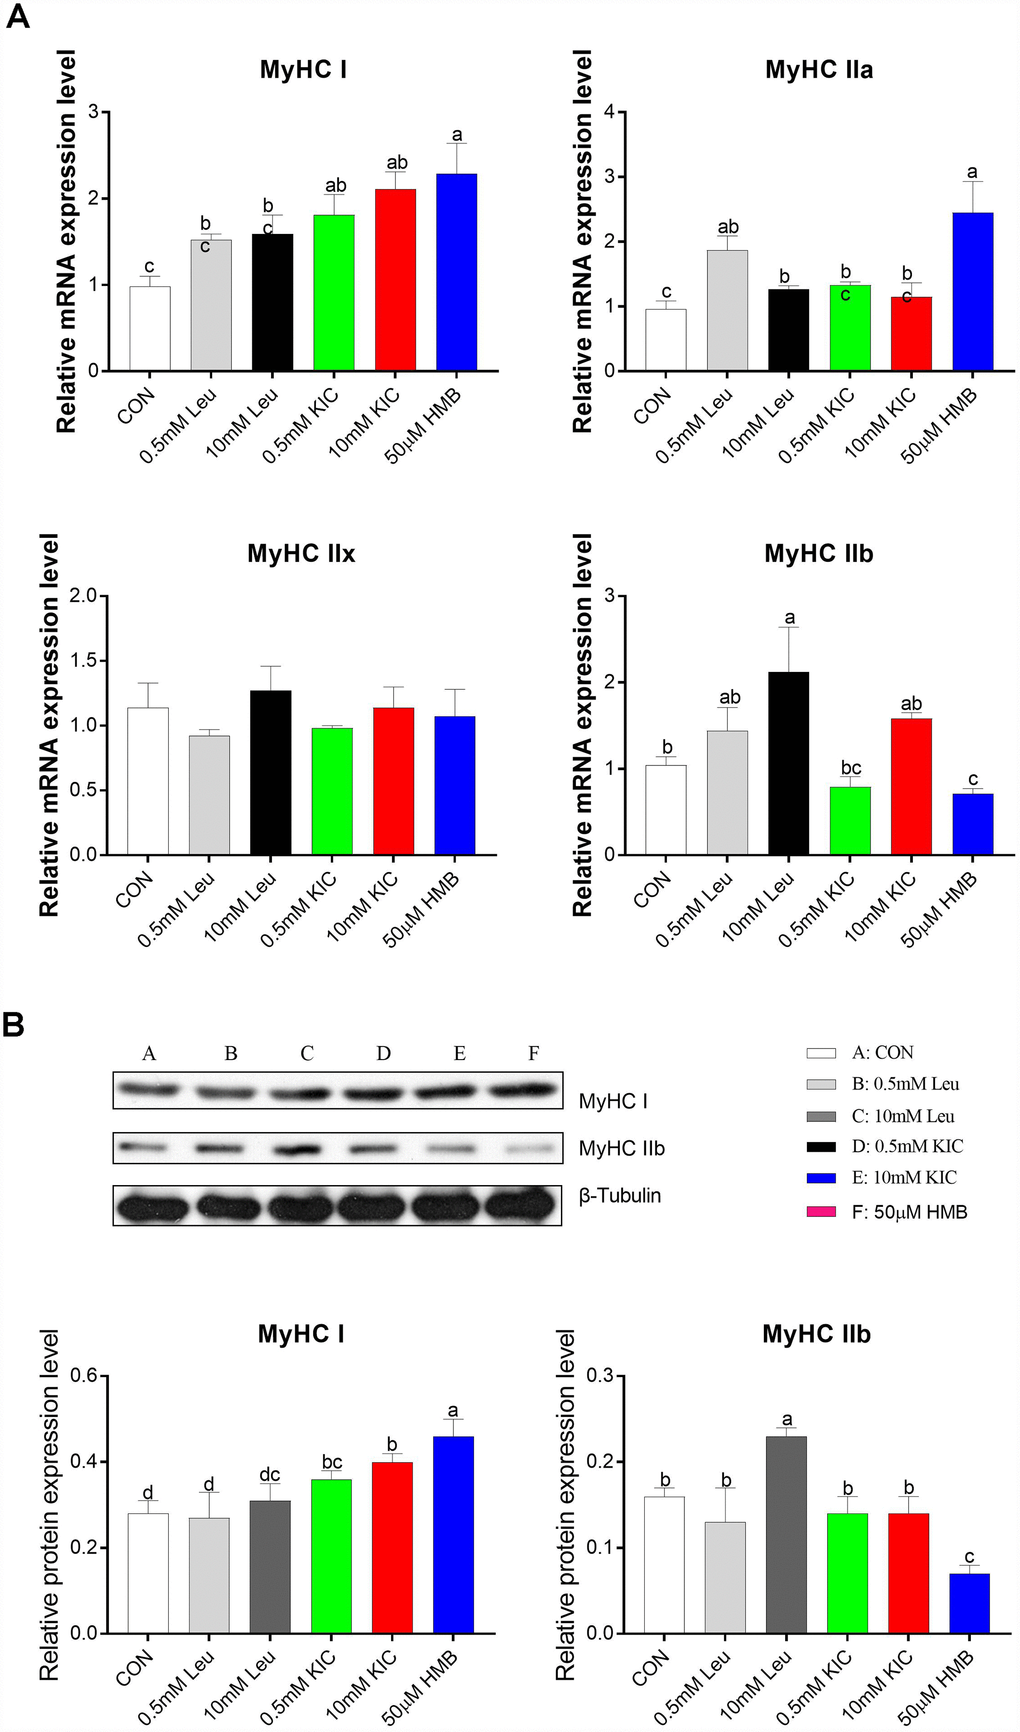 Effects of Leu (0.5 mM or 10 mM), KIC (0.5 mM or 10 mM), and HMB (50 μM) on the gene expression of myosin heavy chain isoform (MyHC I, IIa, IIx, and IIb) (A) and the protein expression of MyHCI and MyHC IIb (B). Results are expressed as mean ± SEM. Different letters (a, b, c) indicated significant differences (P 